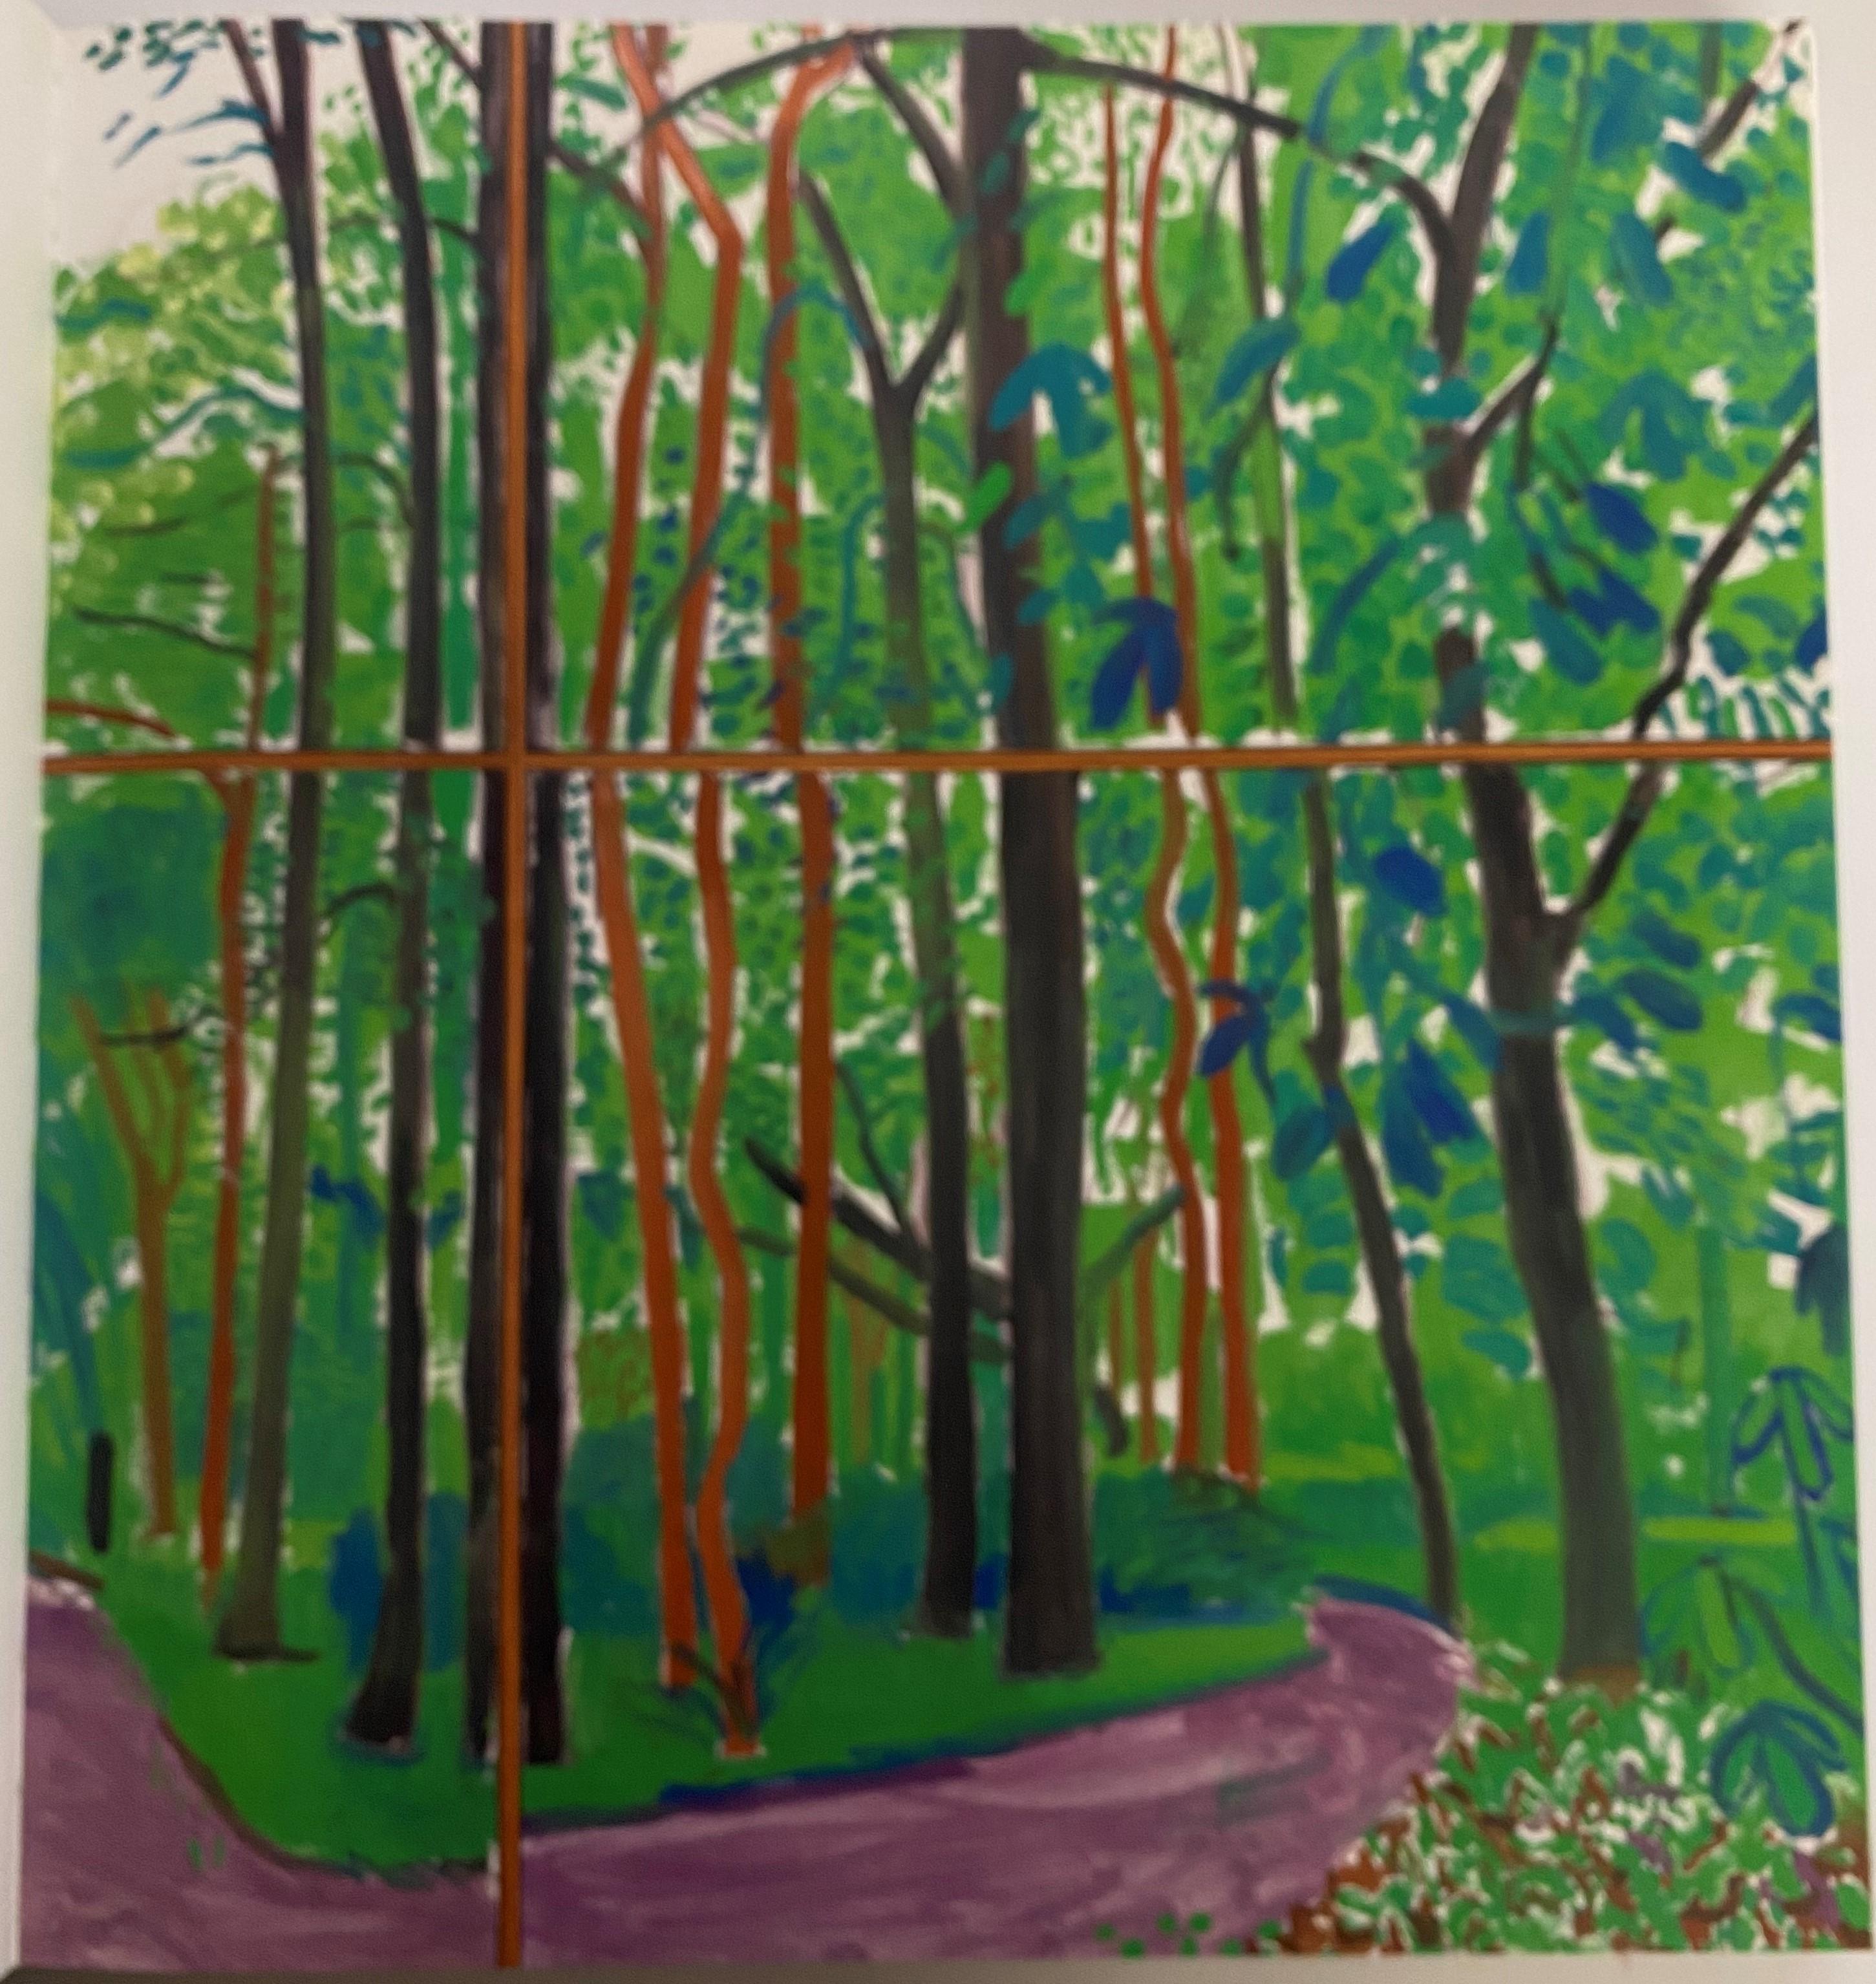 David Hockney CH RA has always been closely associated with California, where he has lived for much of his life. This major study of his work redefines him as an important painter of the English countryside, presenting his recent landscapes for the